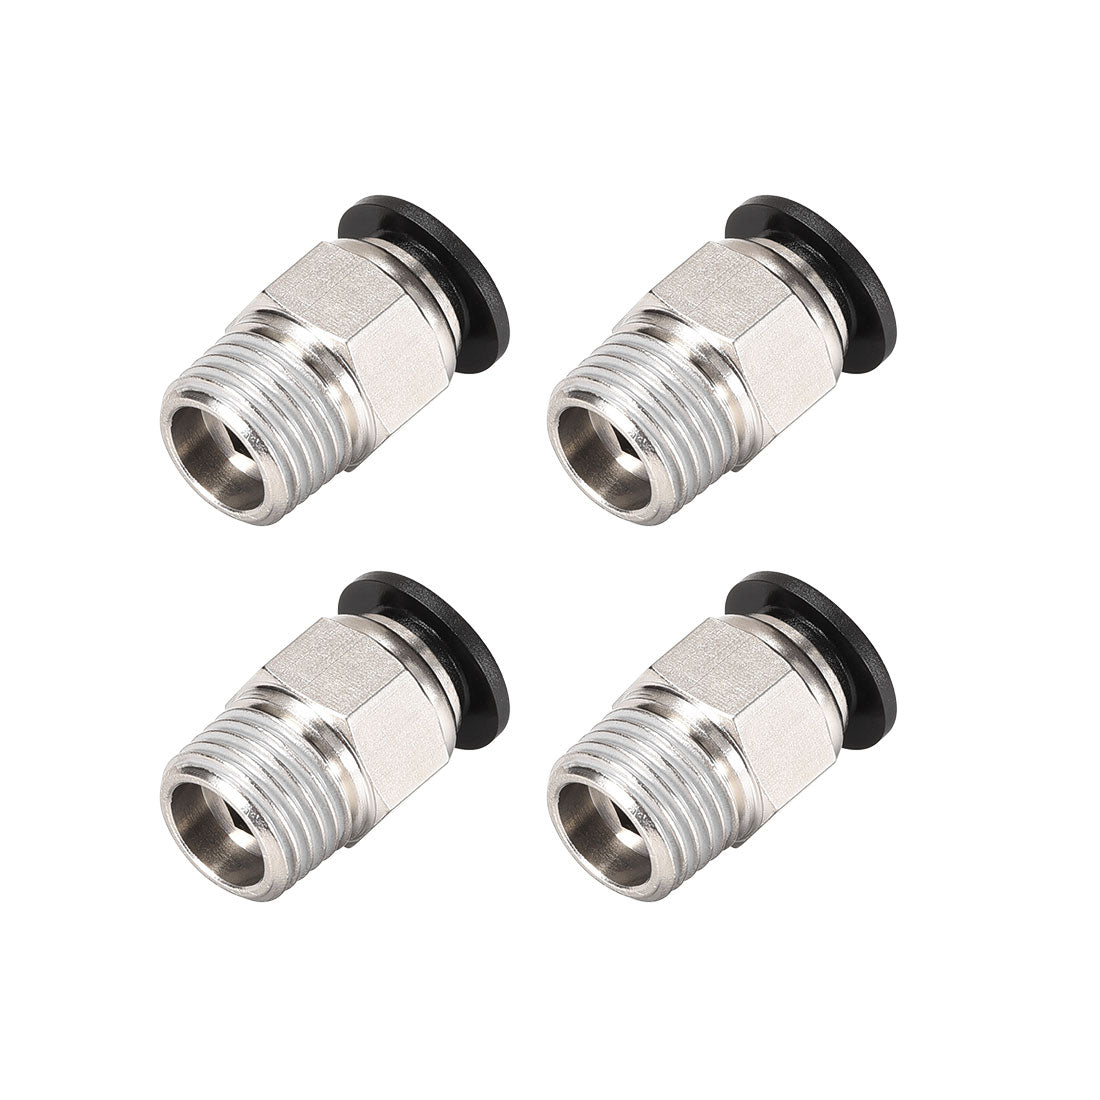 uxcell Uxcell Straight Pneumatic Push to Quick Connect Fittings 1/4NPT Male x 8mm Tube OD Silver Tone 4pcs